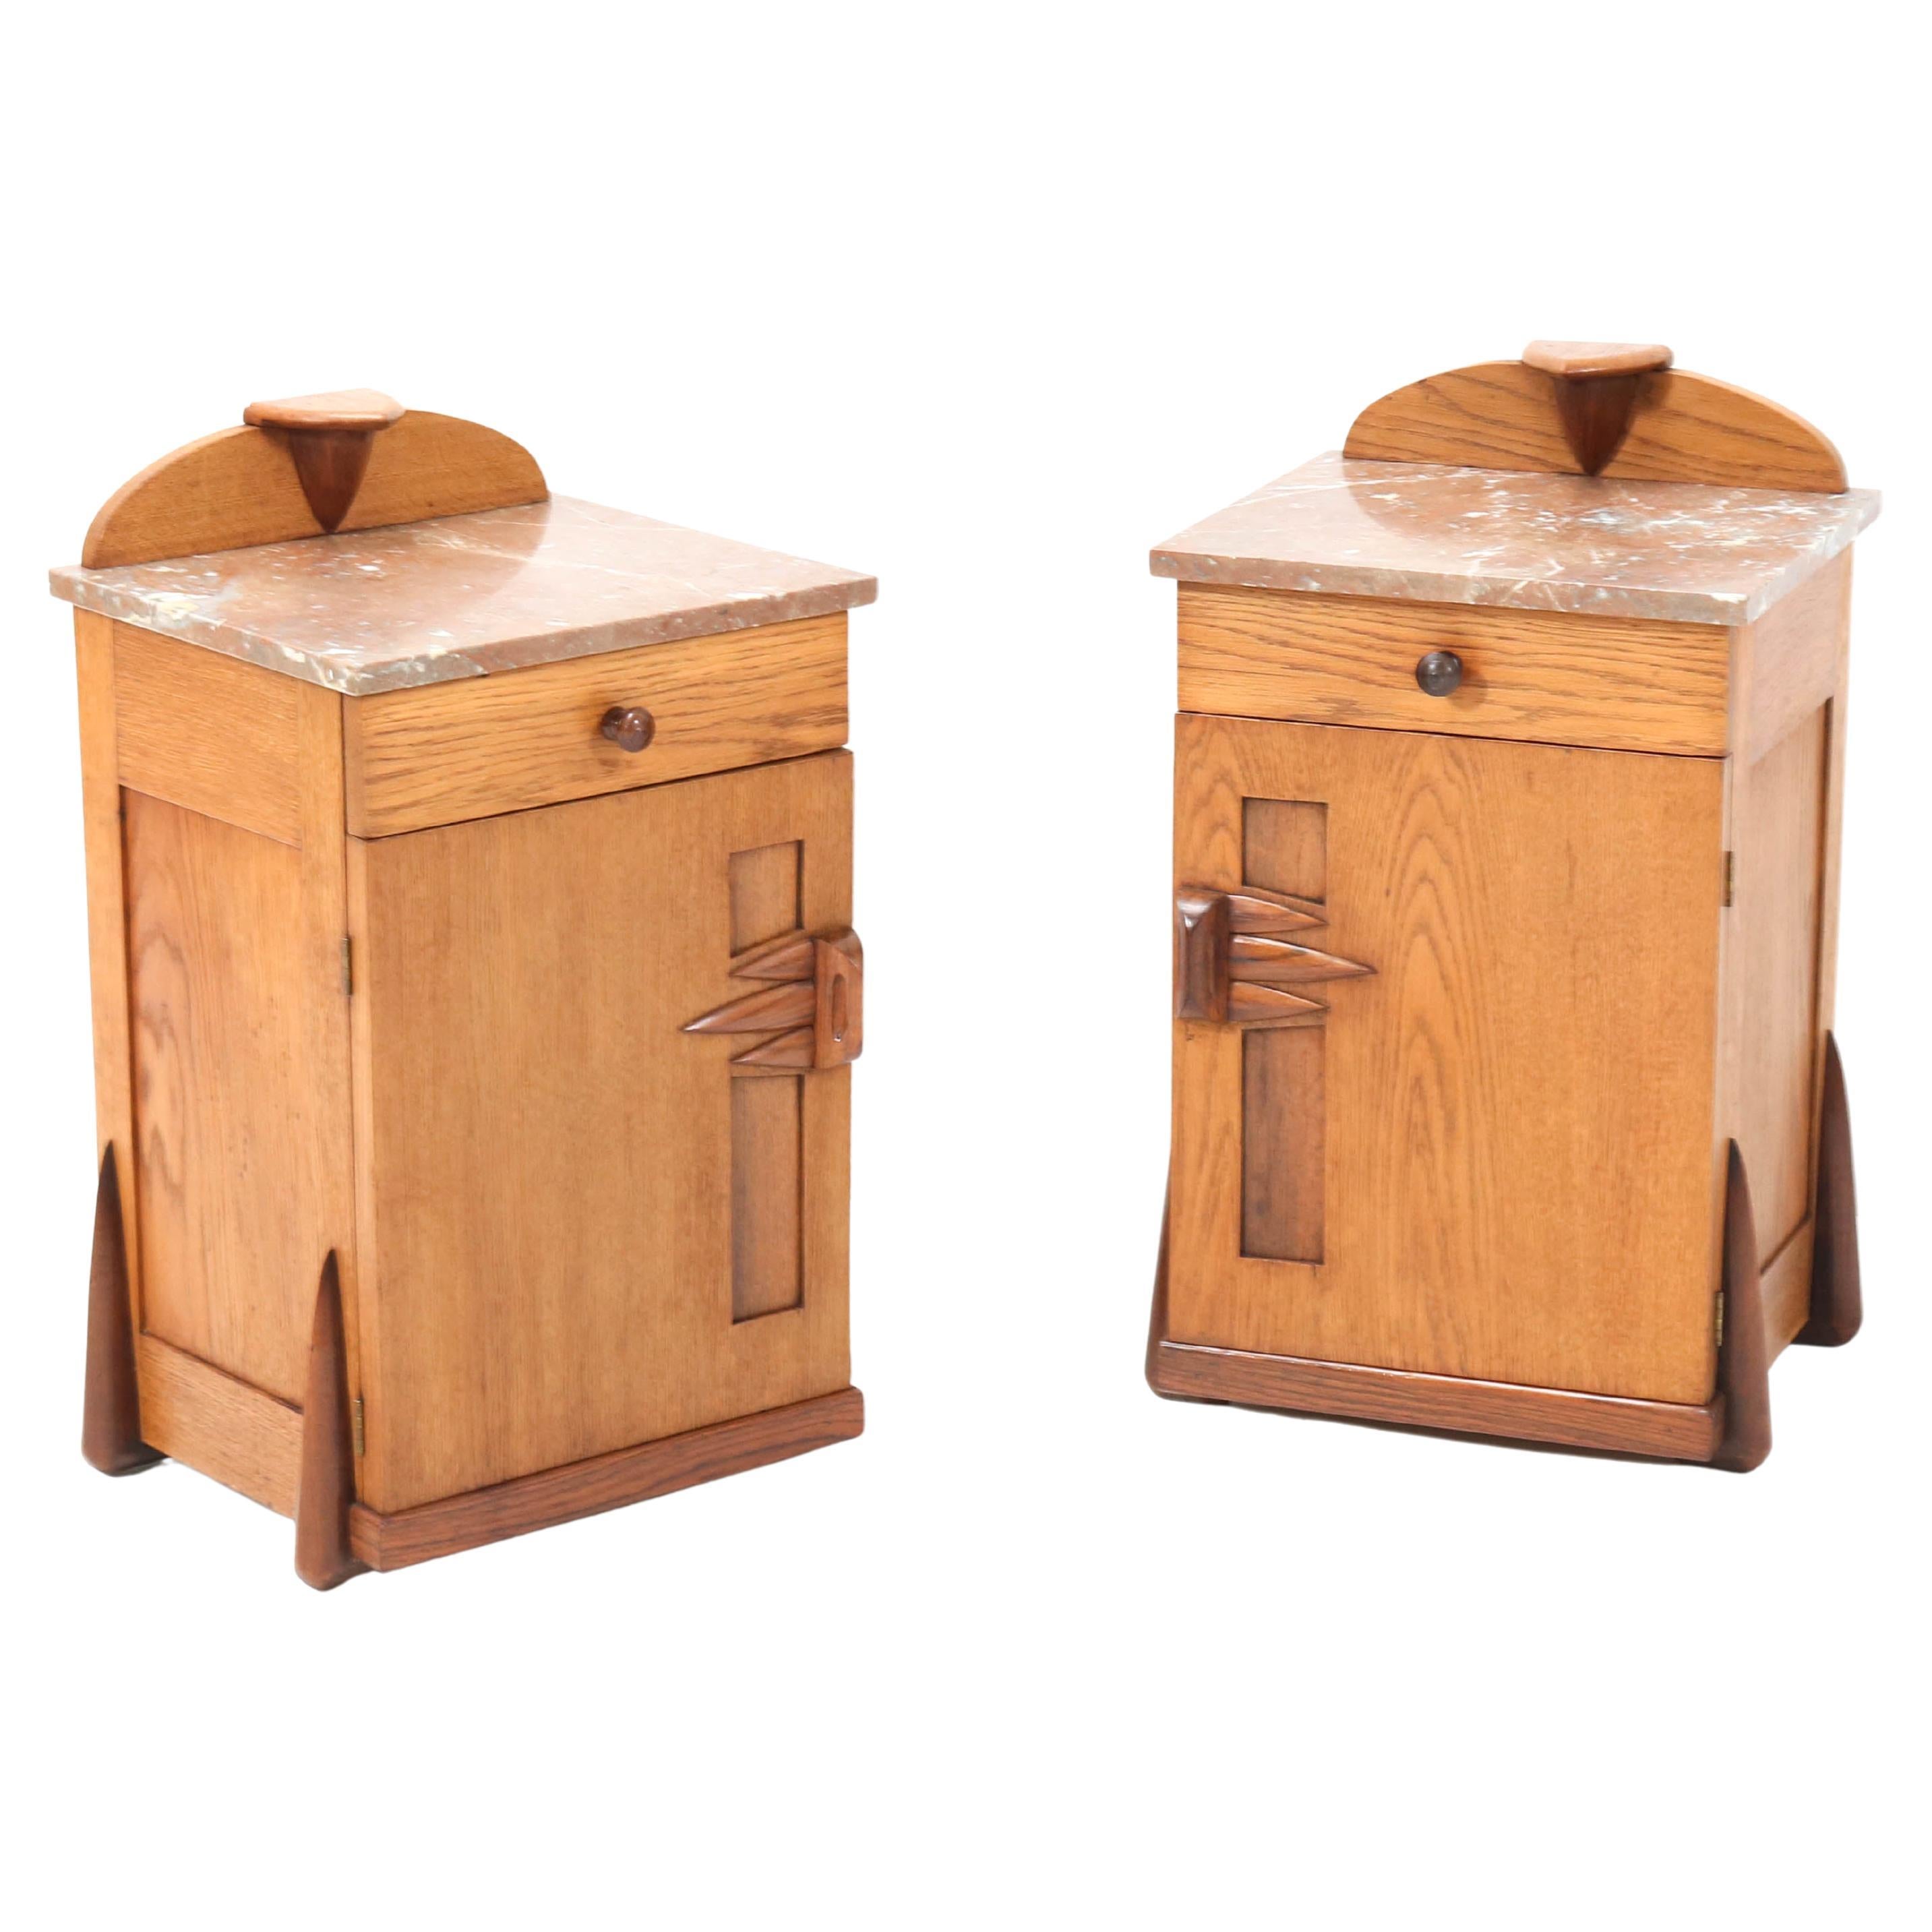 Two Oak Art Deco Amsterdamse School Nightstands or Bedside Tables by Max Coini